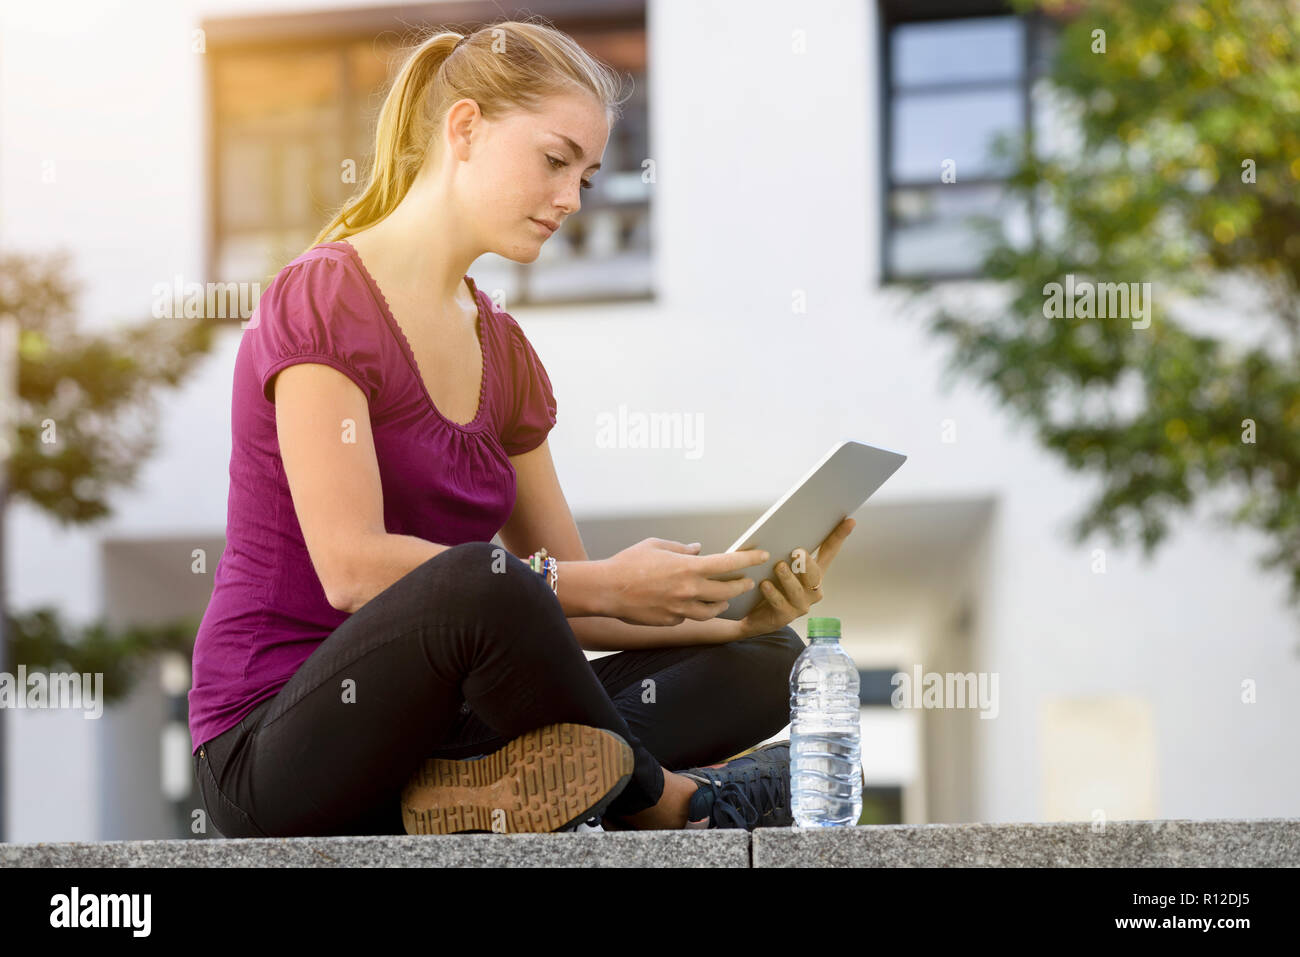 Young woman using digital tablet in park Banque D'Images